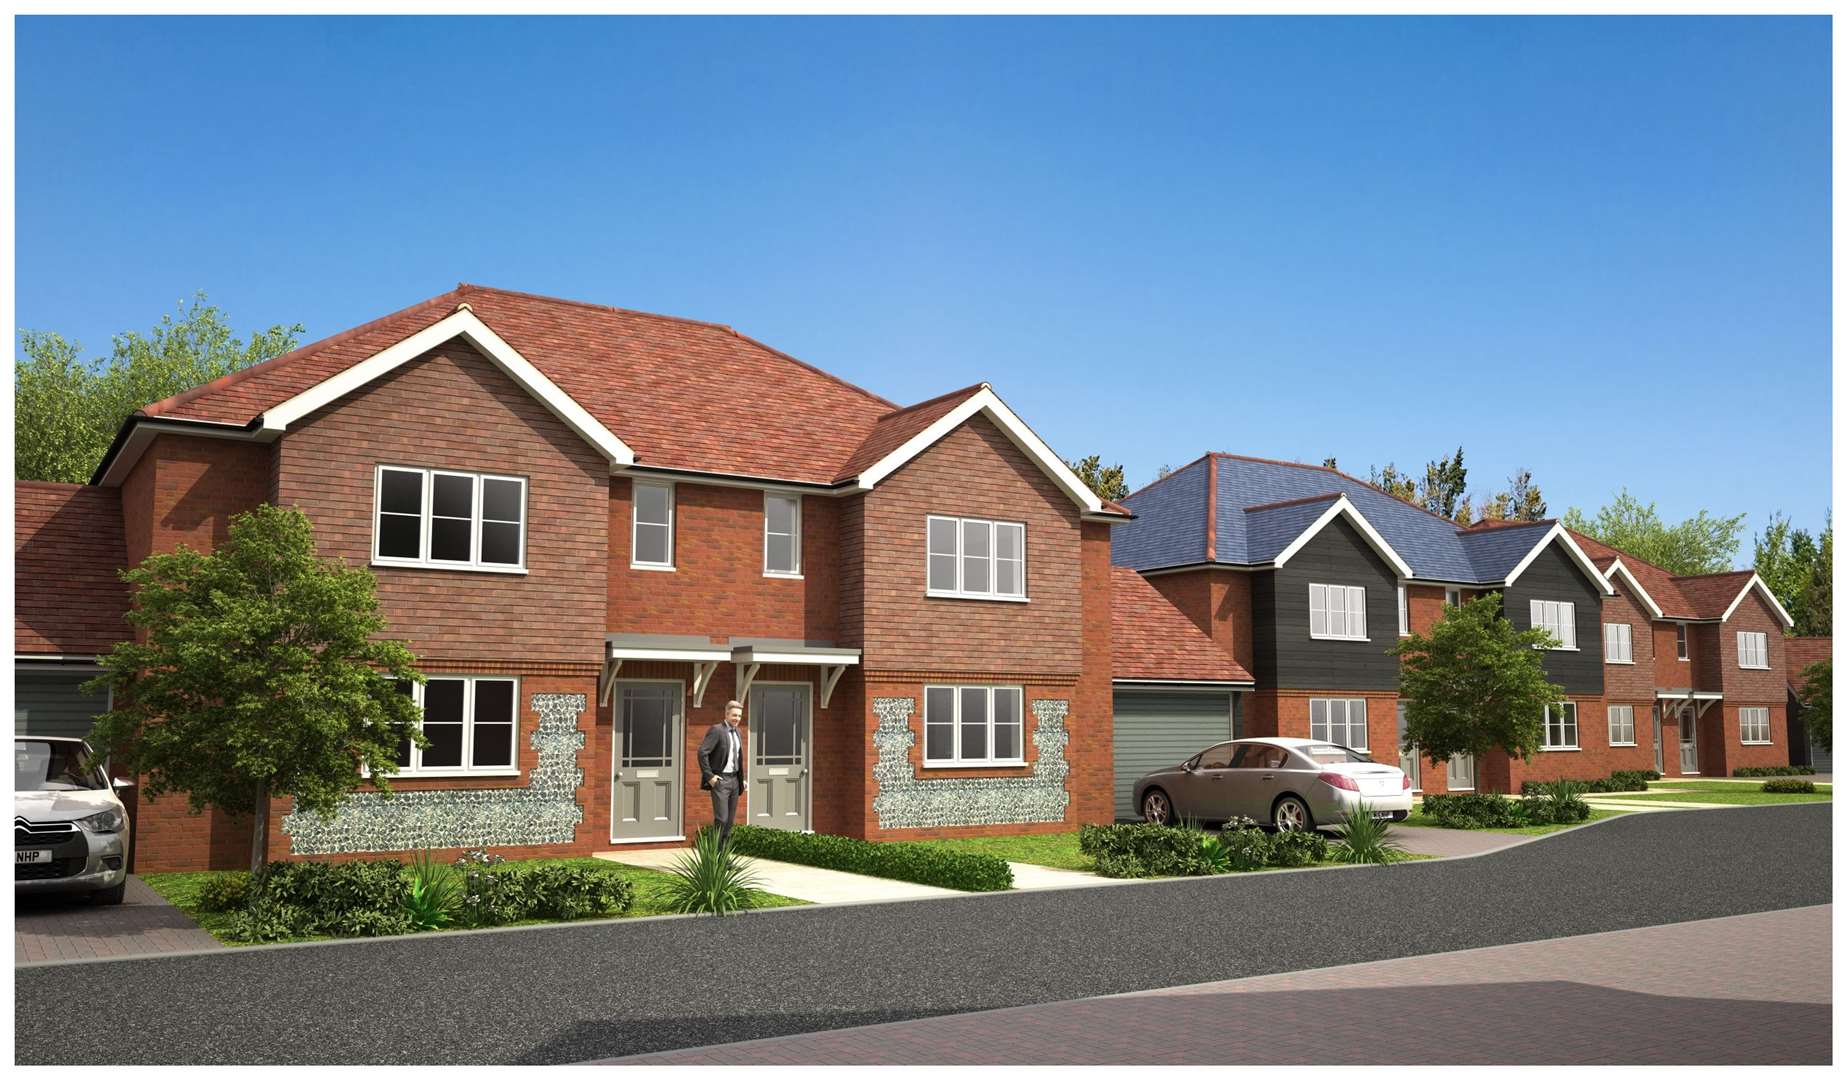 How the homes in Eythorne might look if approved. Picture: Rebus Planning Solutions (43445339)